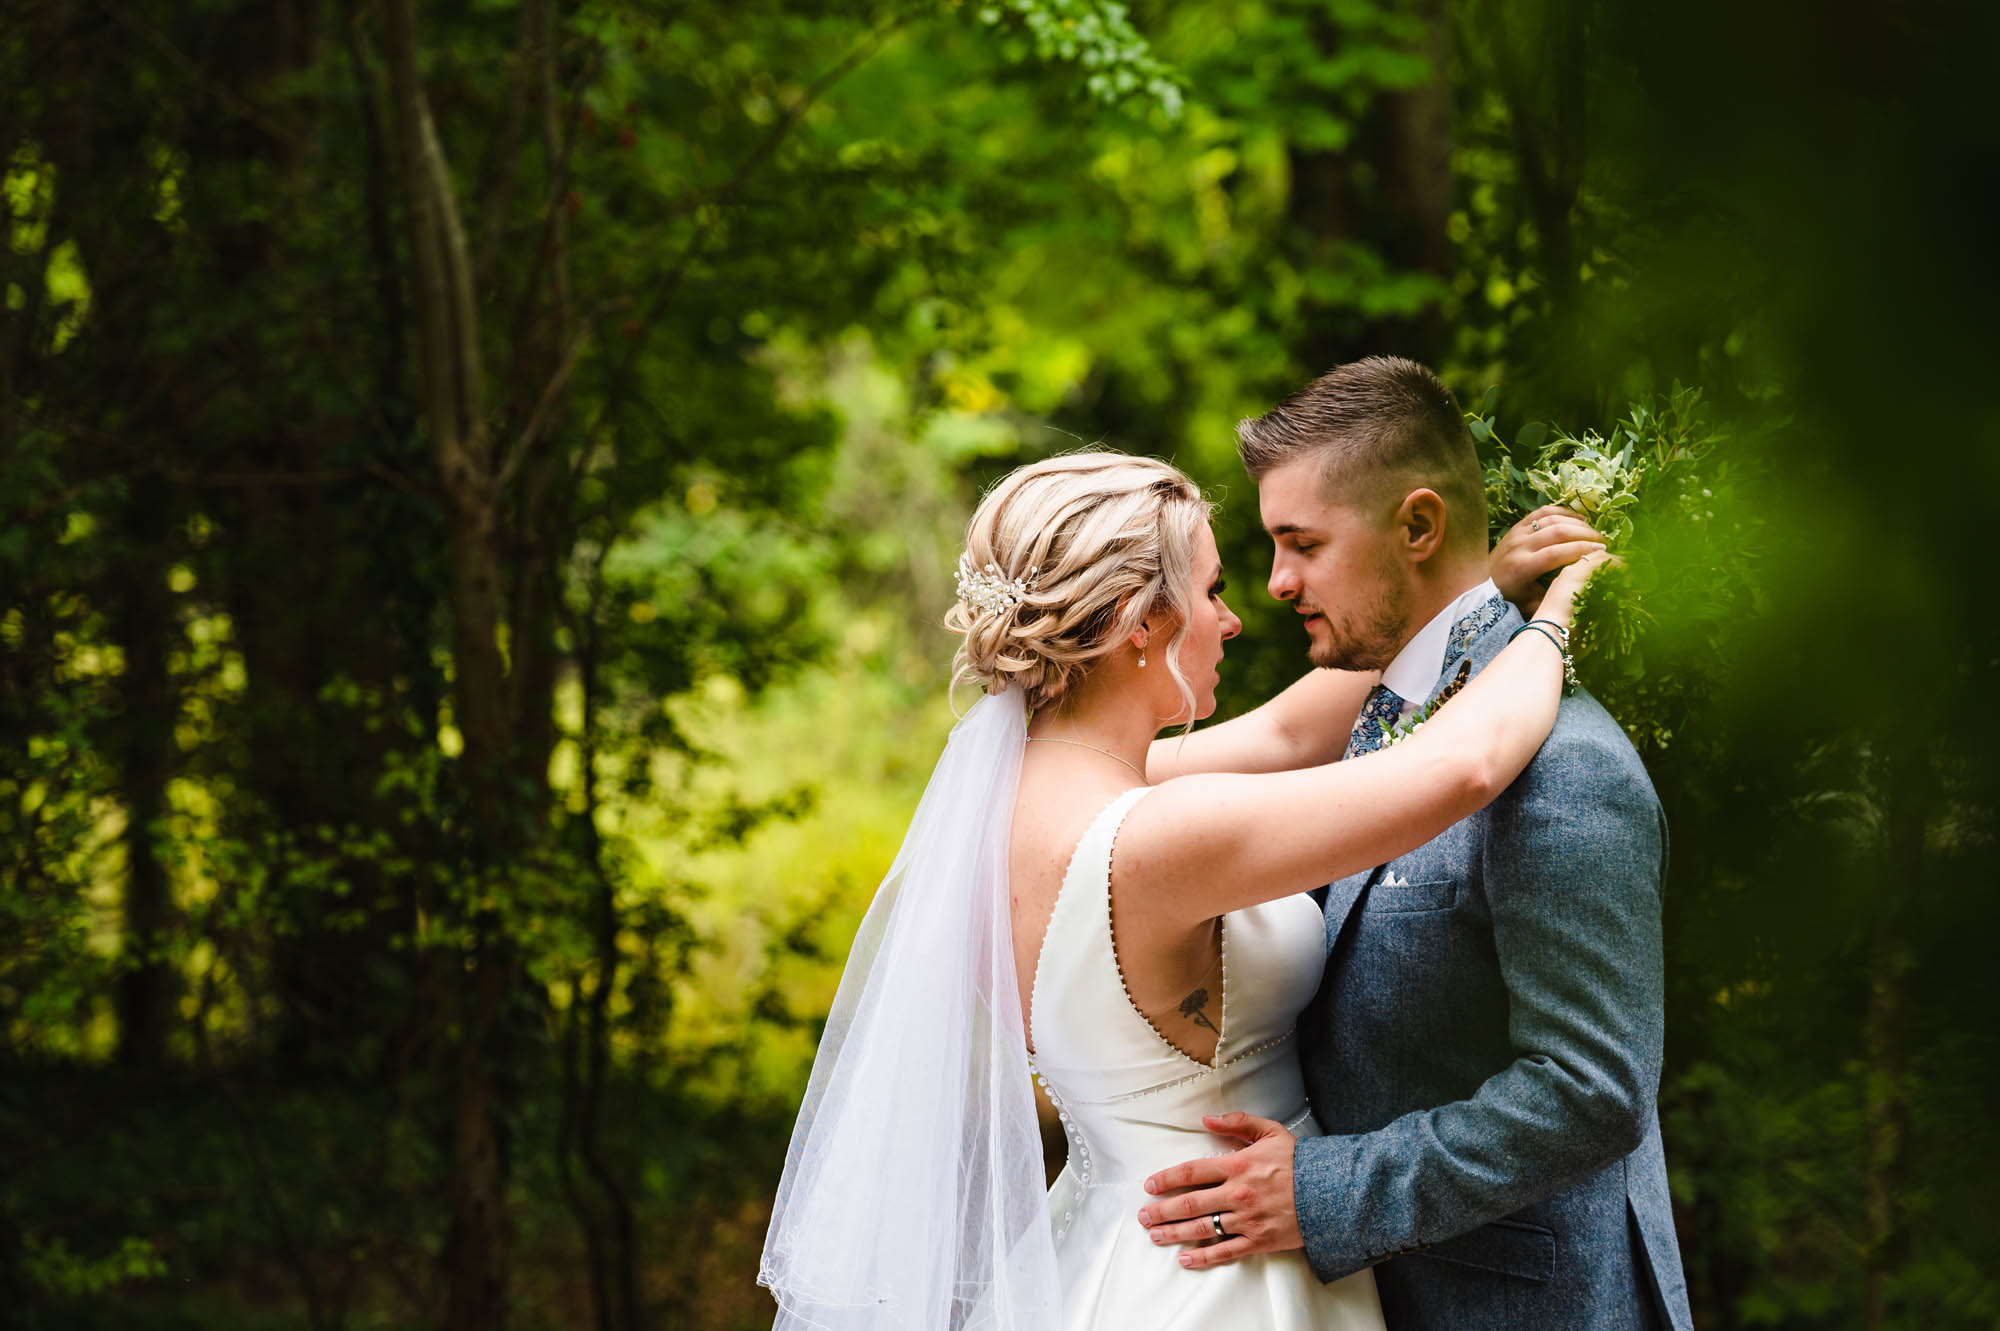 Romantic picture of newlyweds in woodland. The bride has her arms around the groom and he's holding her waist